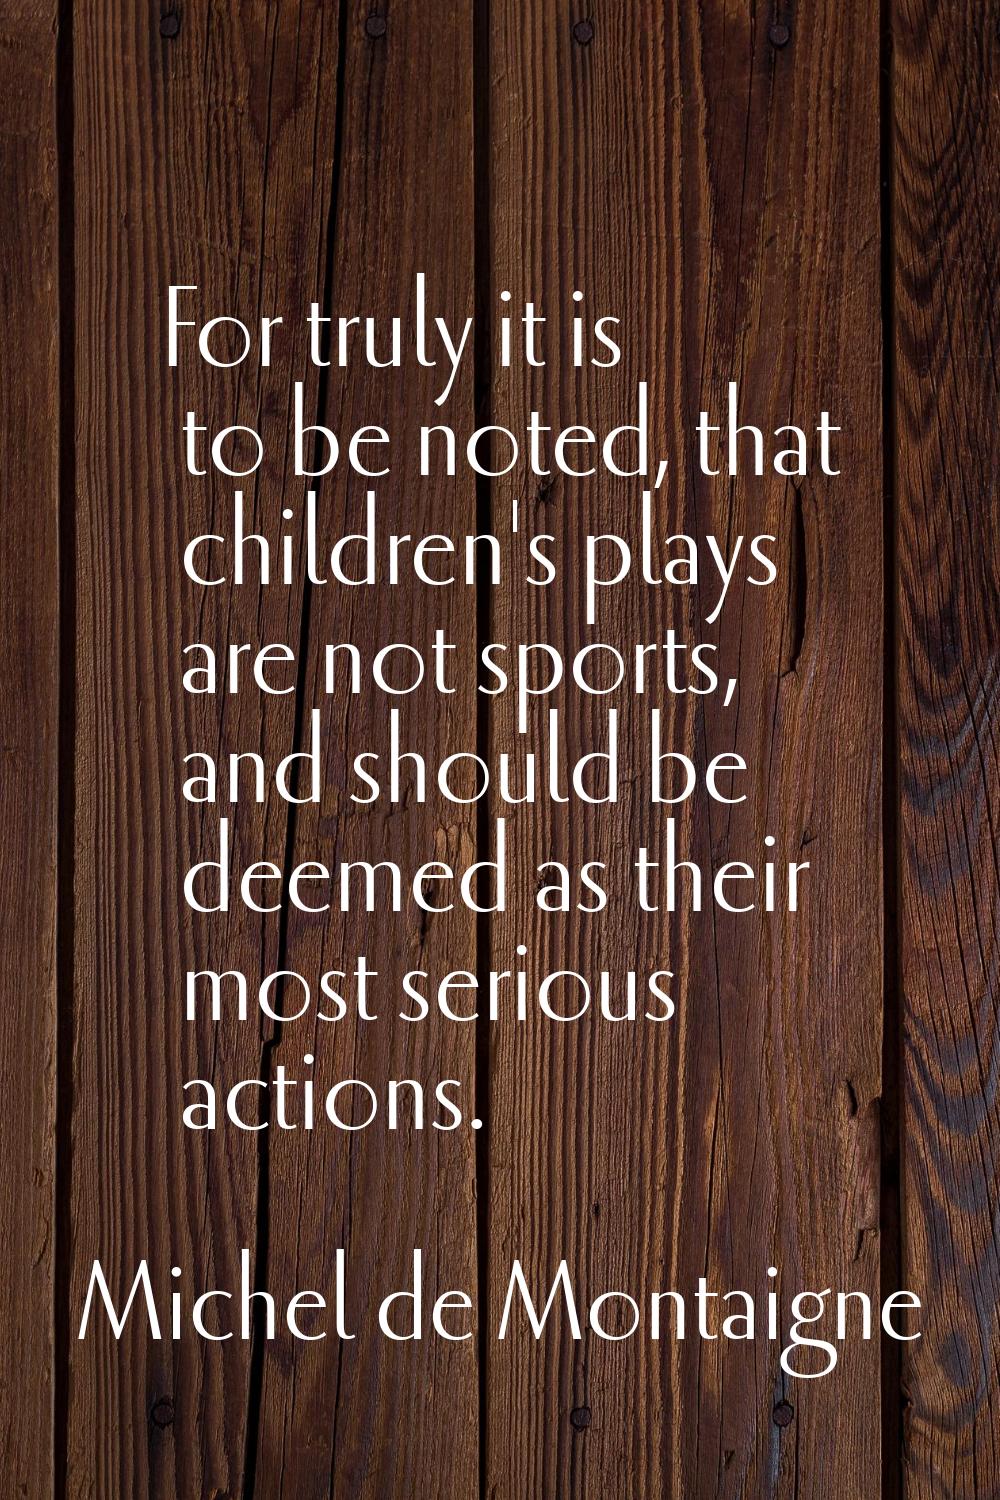 For truly it is to be noted, that children's plays are not sports, and should be deemed as their mo